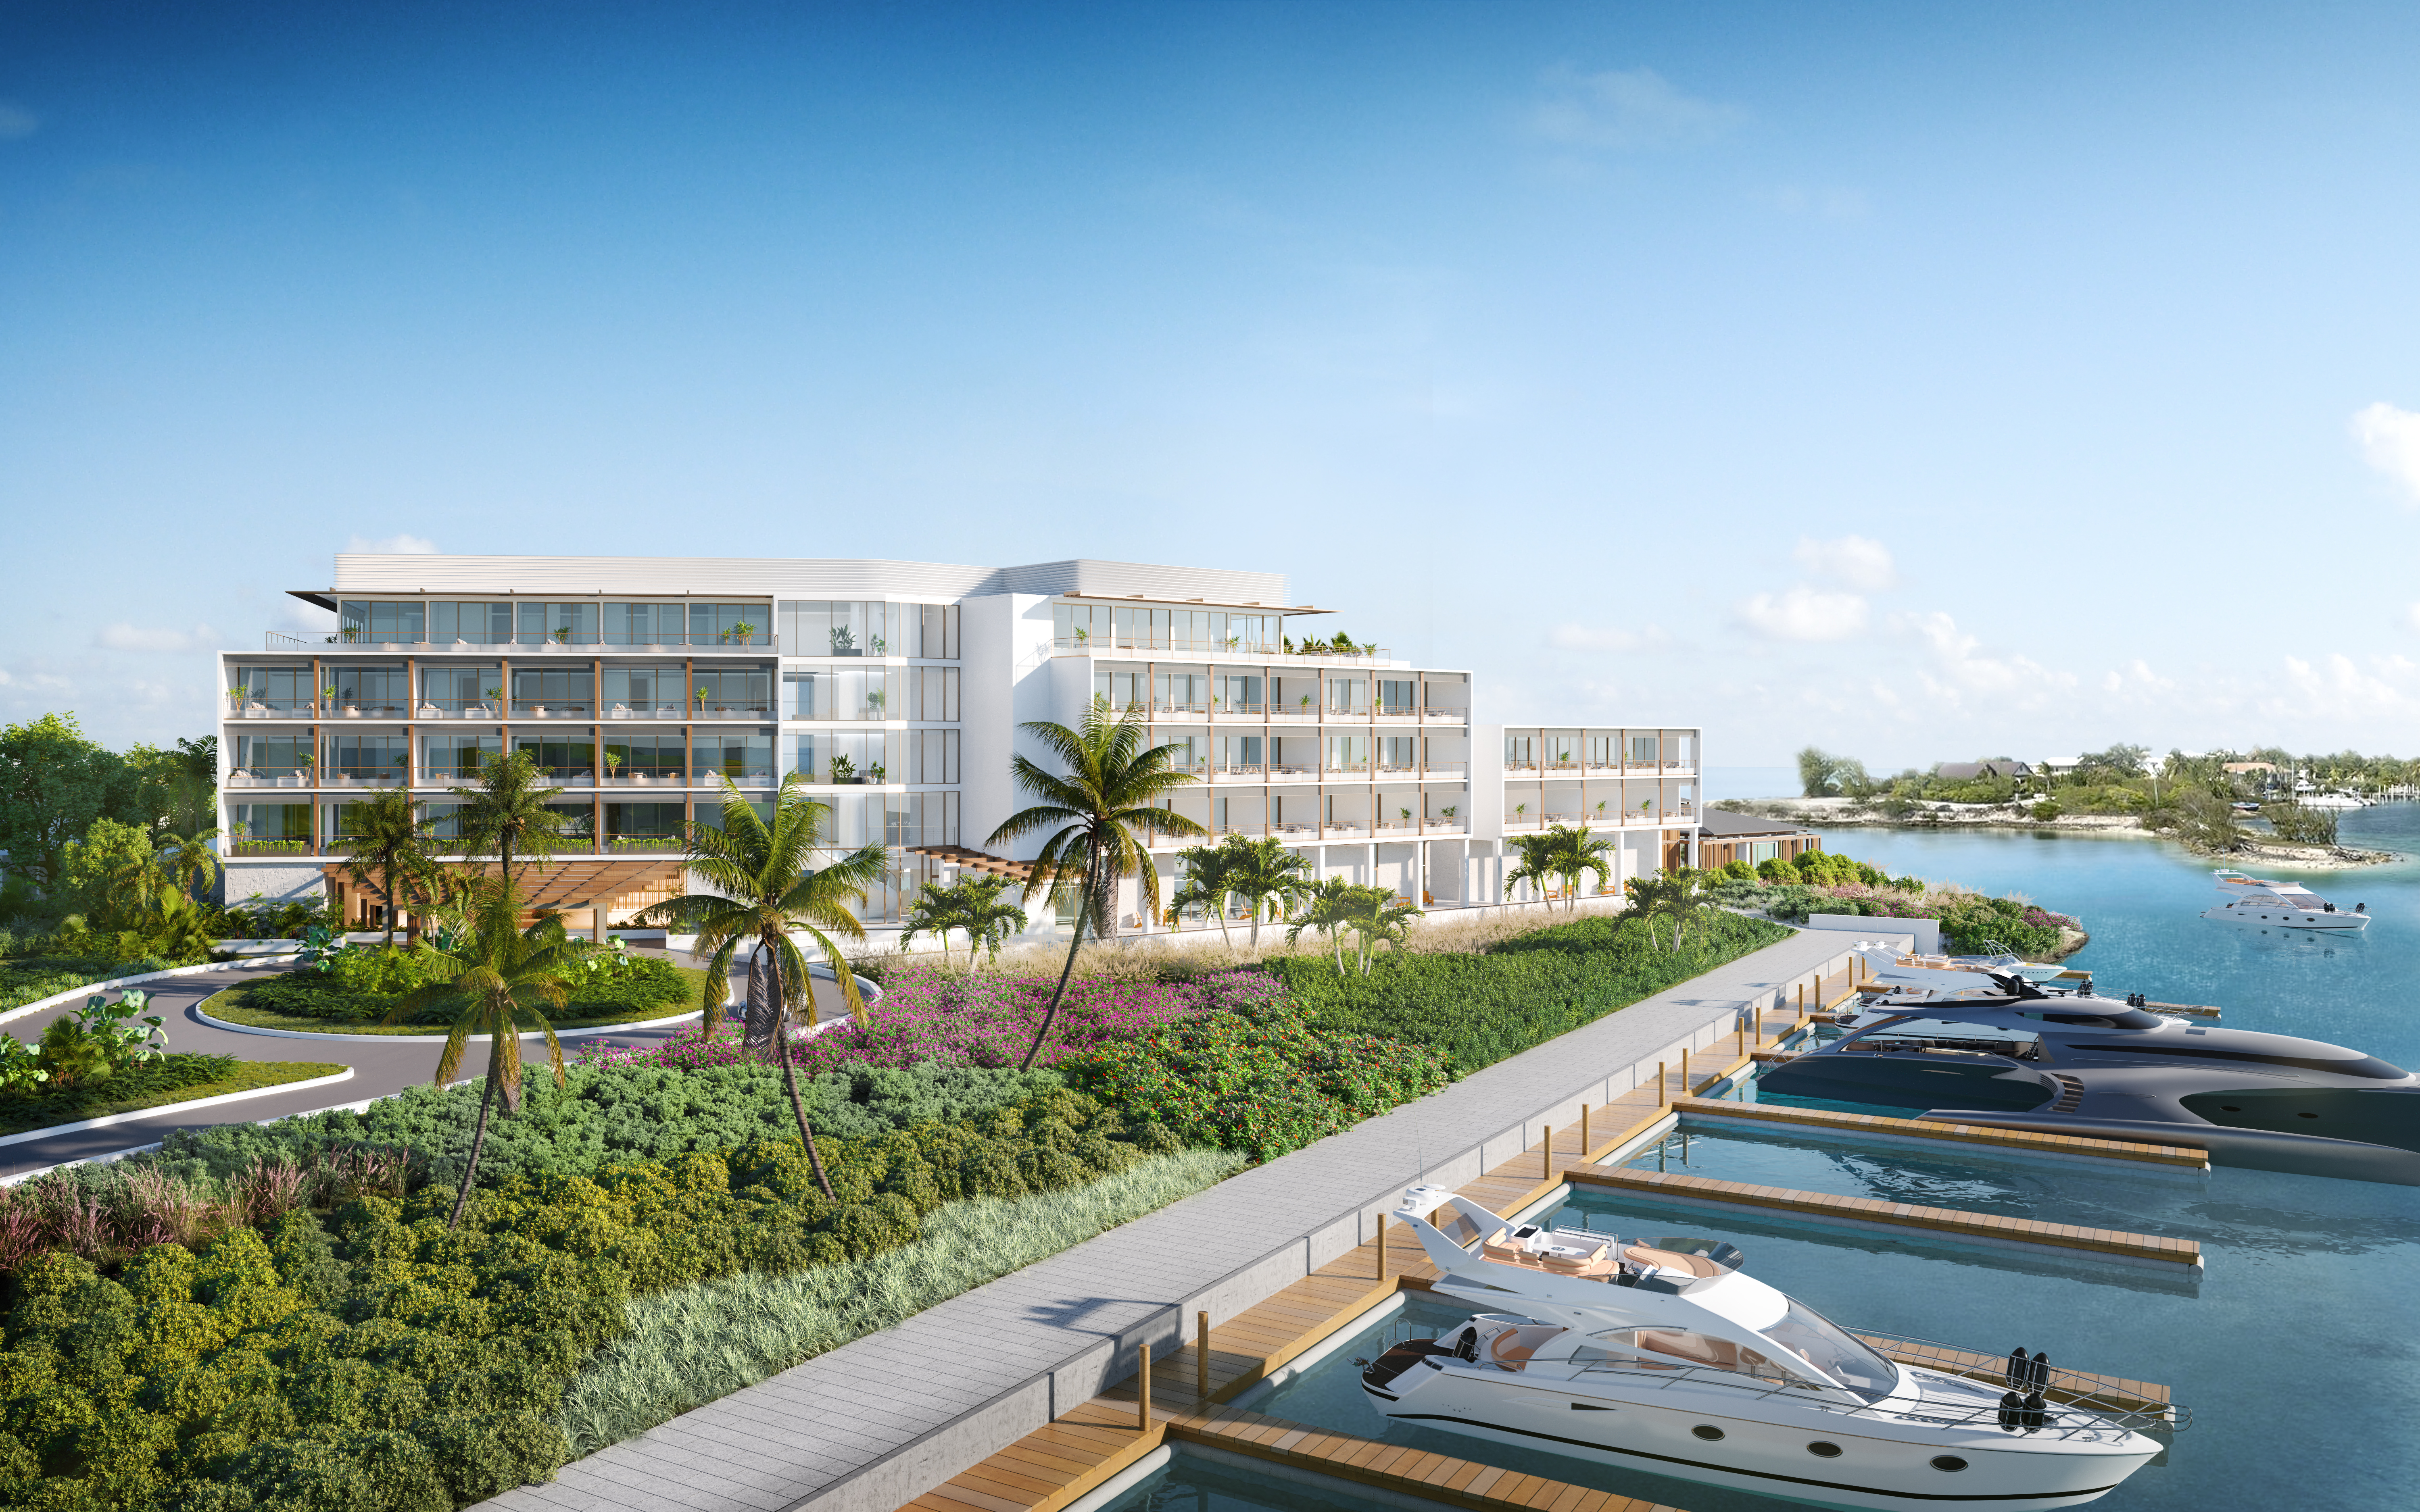 PRESS RELEASE: SCP Closes $113.5M Loan for The Loren at Turtle Cove Residences in Turks and Caicos Islands